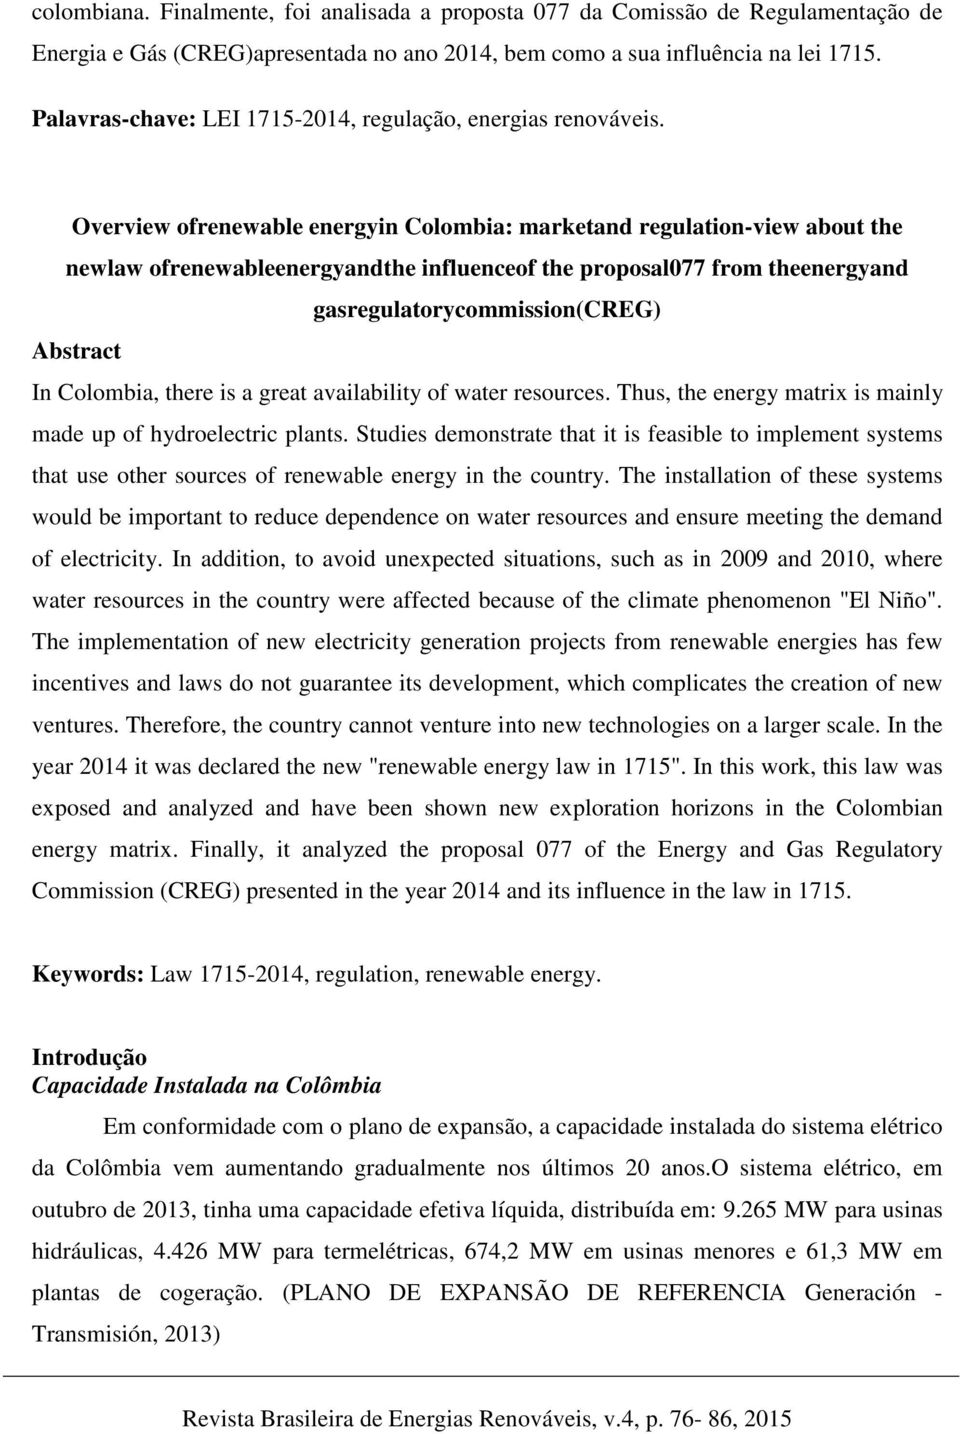 Overview ofrenewable energyin Colombia: marketand regulation-view about the newlaw ofrenewableenergyandthe influenceof the proposal077 from theenergyand gasregulatorycommission(creg) Abstract In